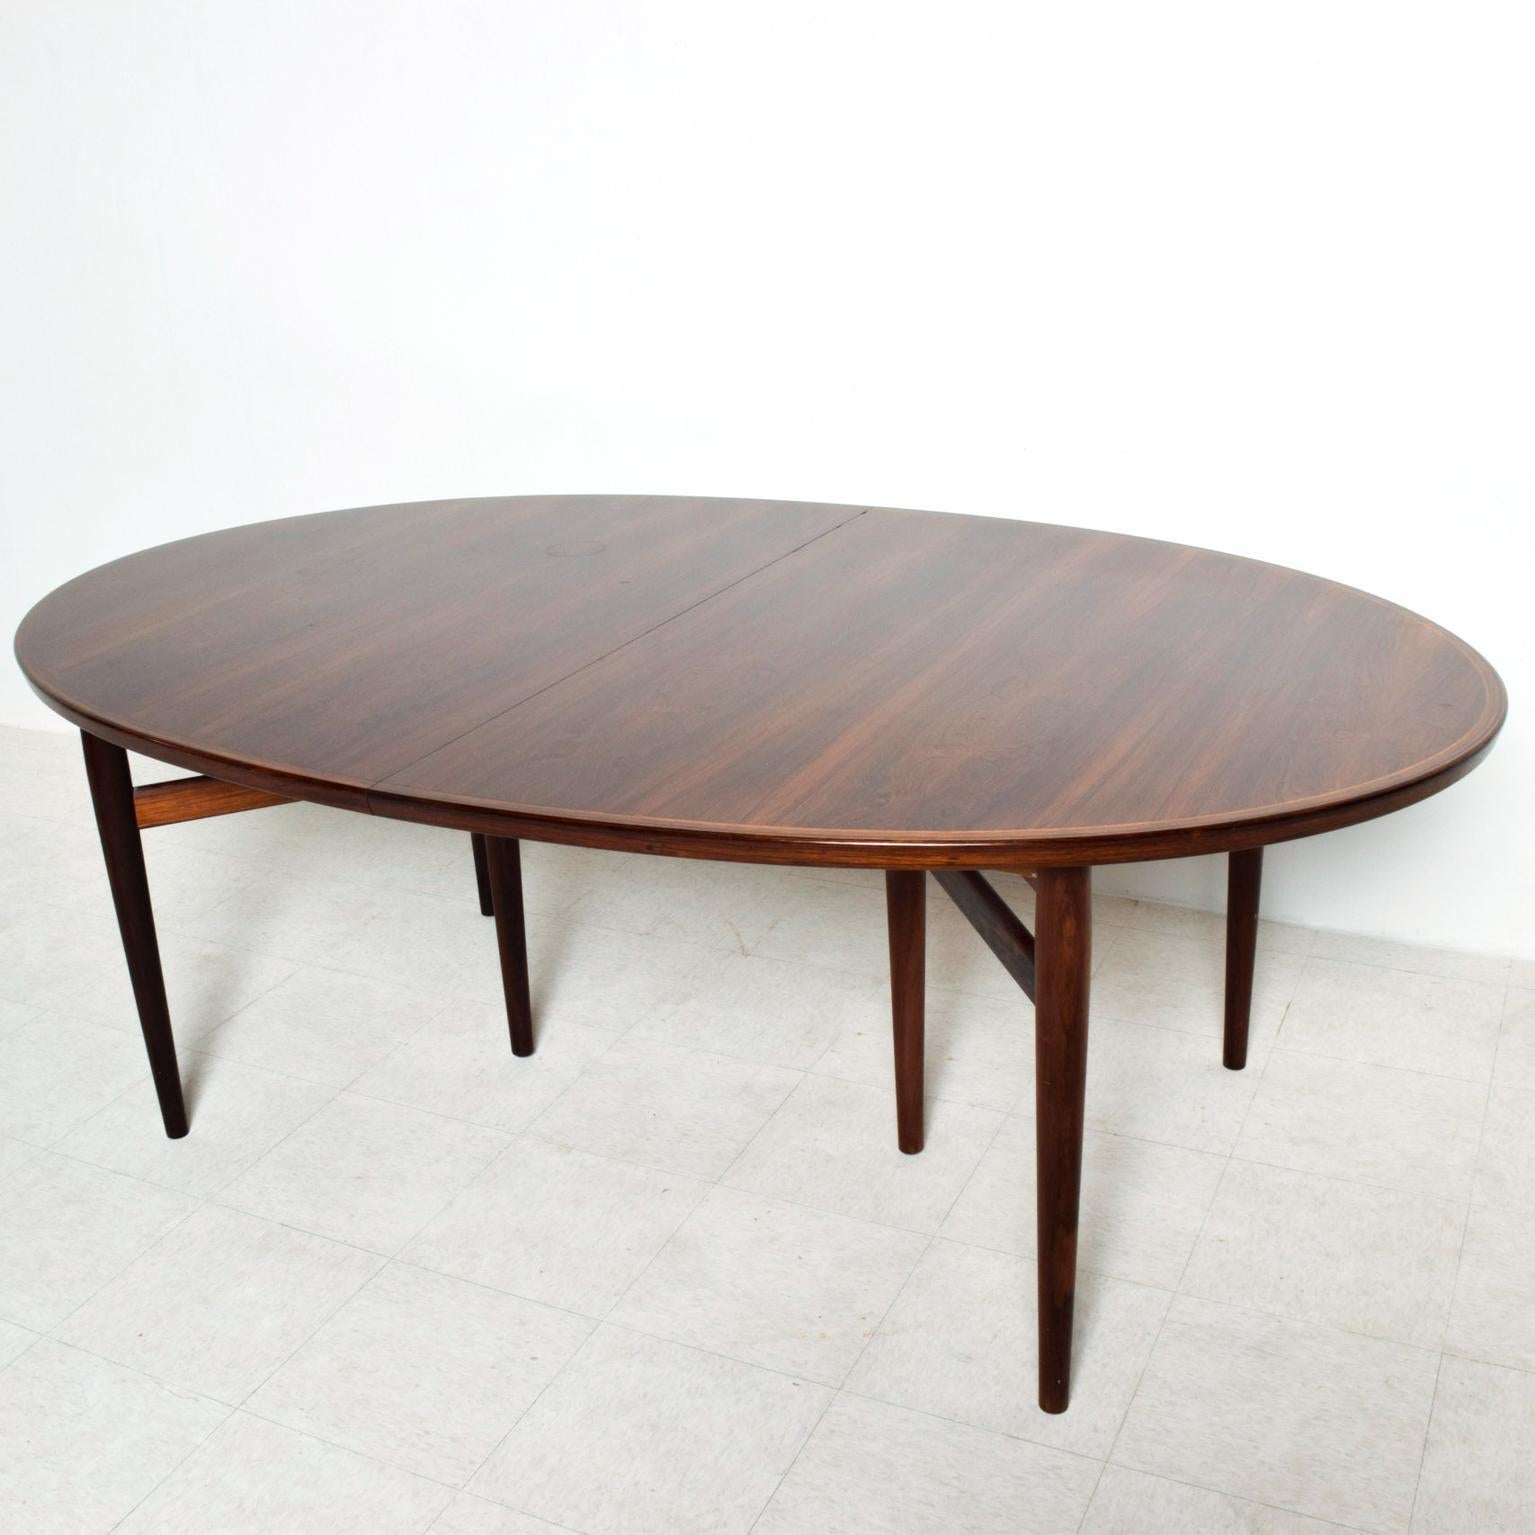 We are pleased to offer for your consideration a beautiful rosewood dining table with an oval shape. Designed by Arne Vodder for SIBAST. Denmark circa 1960s. We have the matching dining chairs, set of six in another posting (solid rosewood with faux